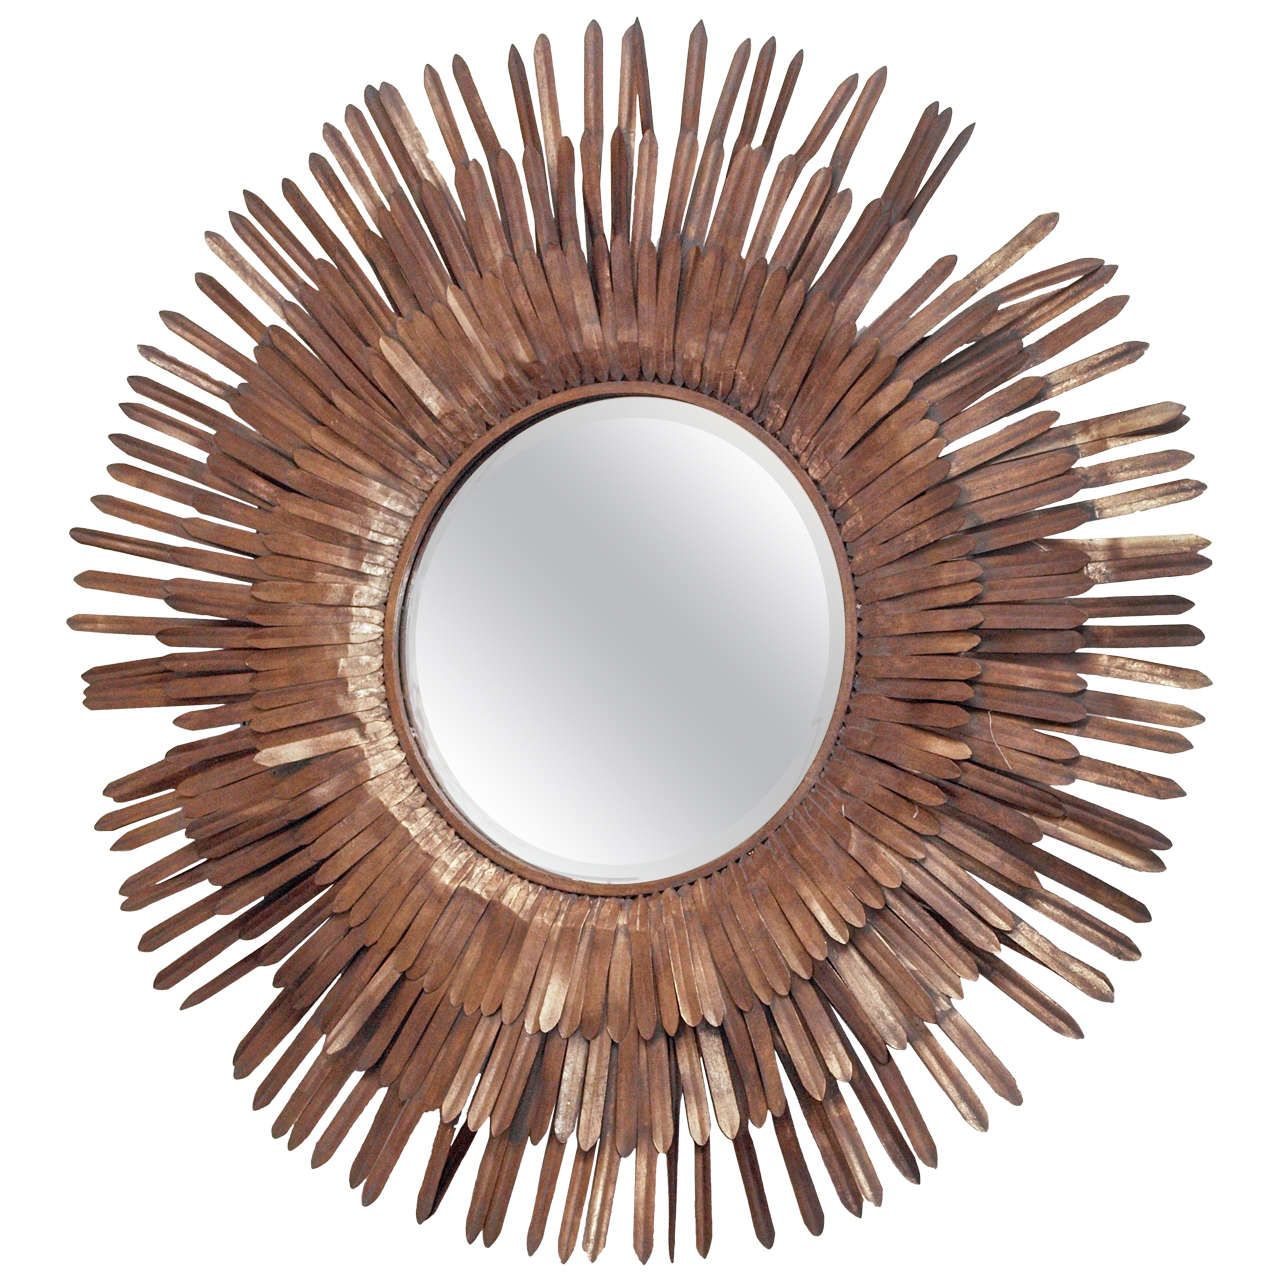 20th Century Italian Sunburst Gilt Metal Beveled Mirror For Sale At 1stdibs With Regard To Famous Twisted Sunburst Metal Wall Art (View 5 of 15)